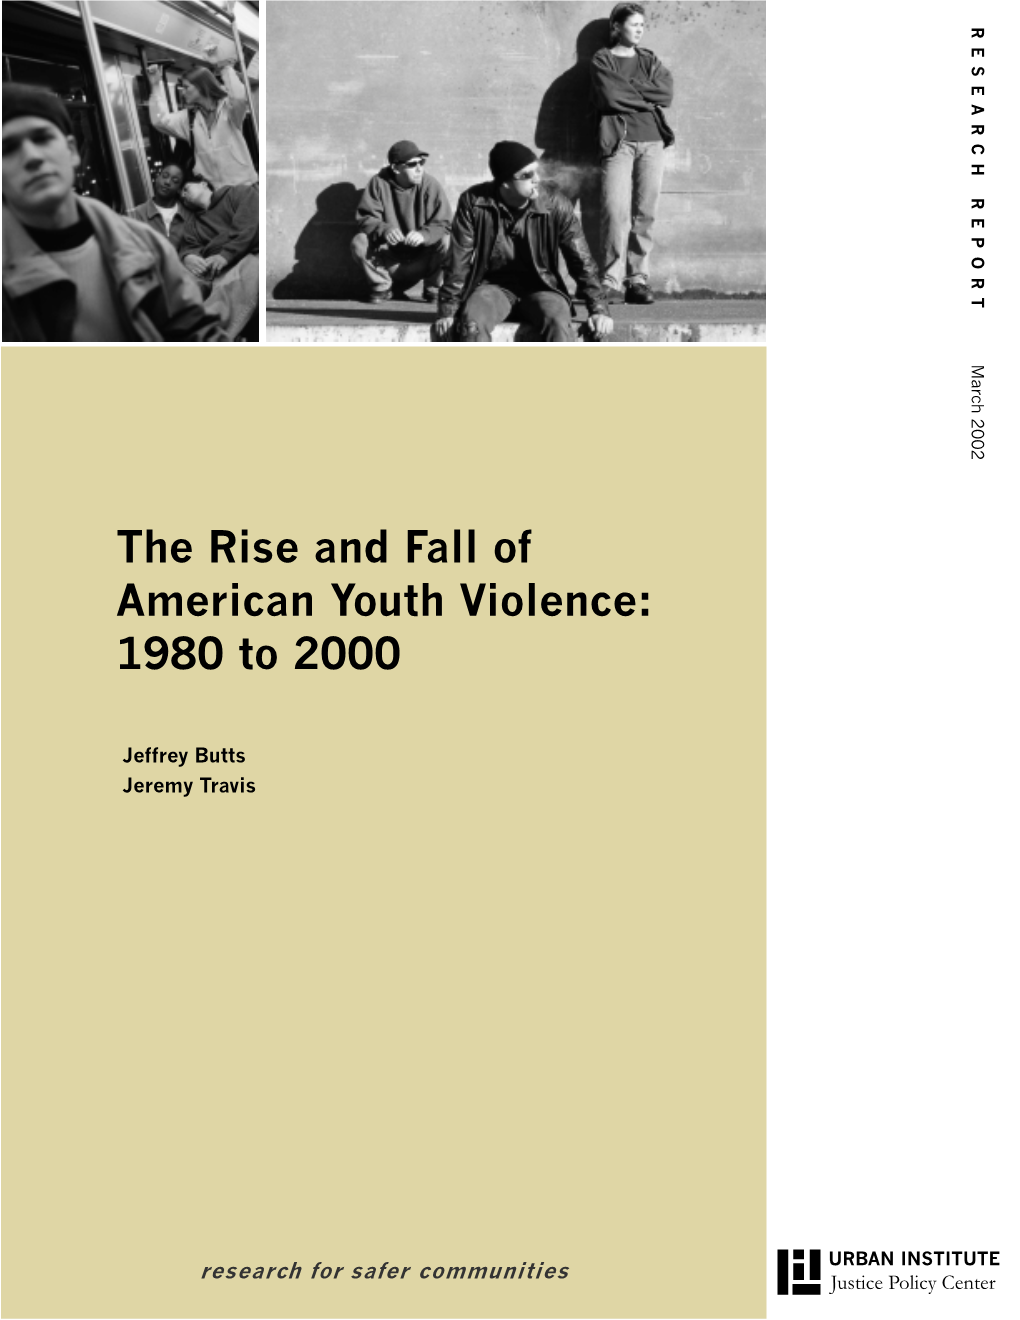 The Rise and Fall of American Youth Violence: 1980 to 2000